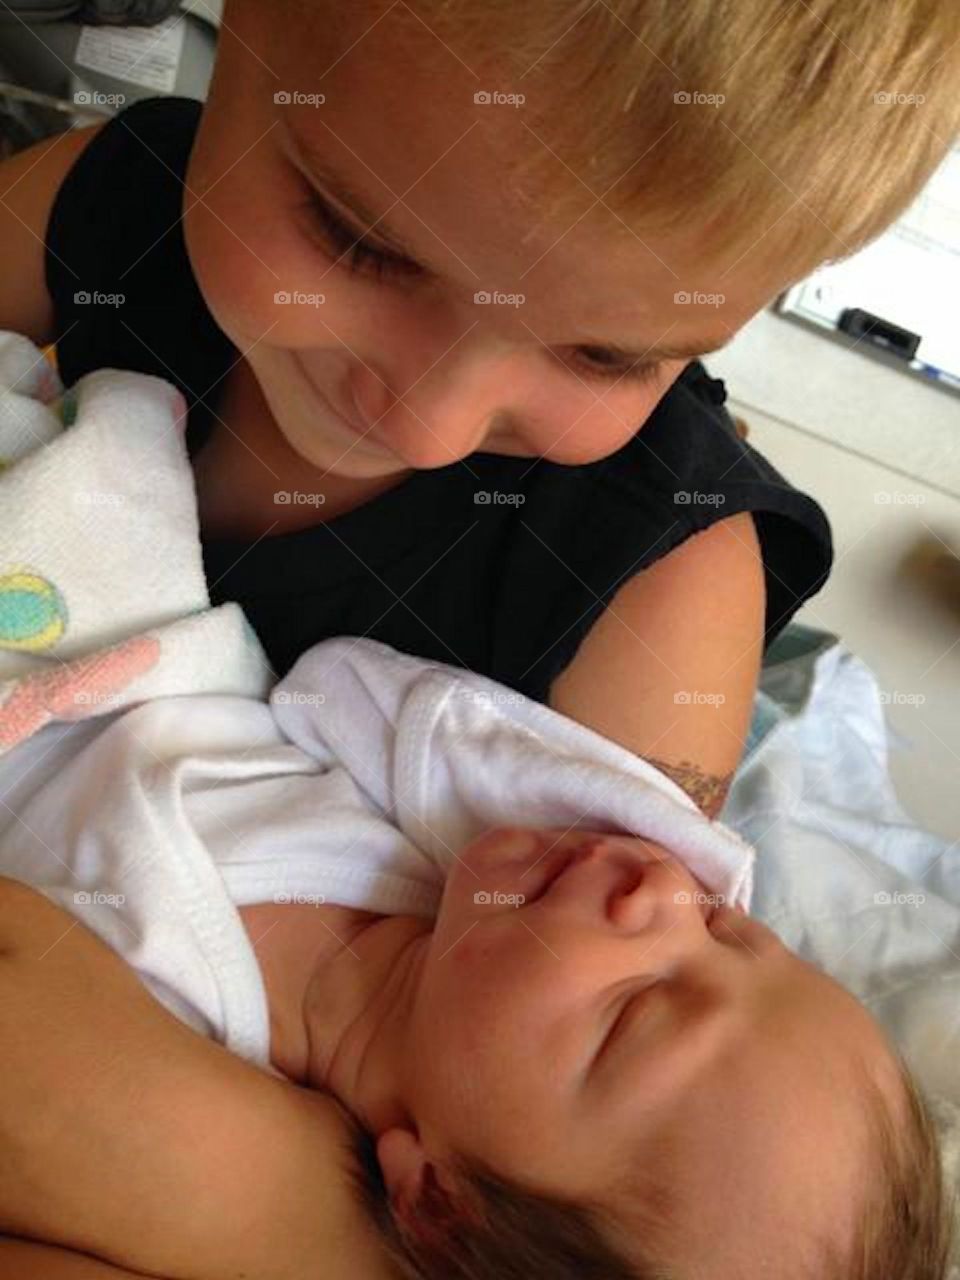 Loves Beginnings. The bond between brother and sister begins right from the start.